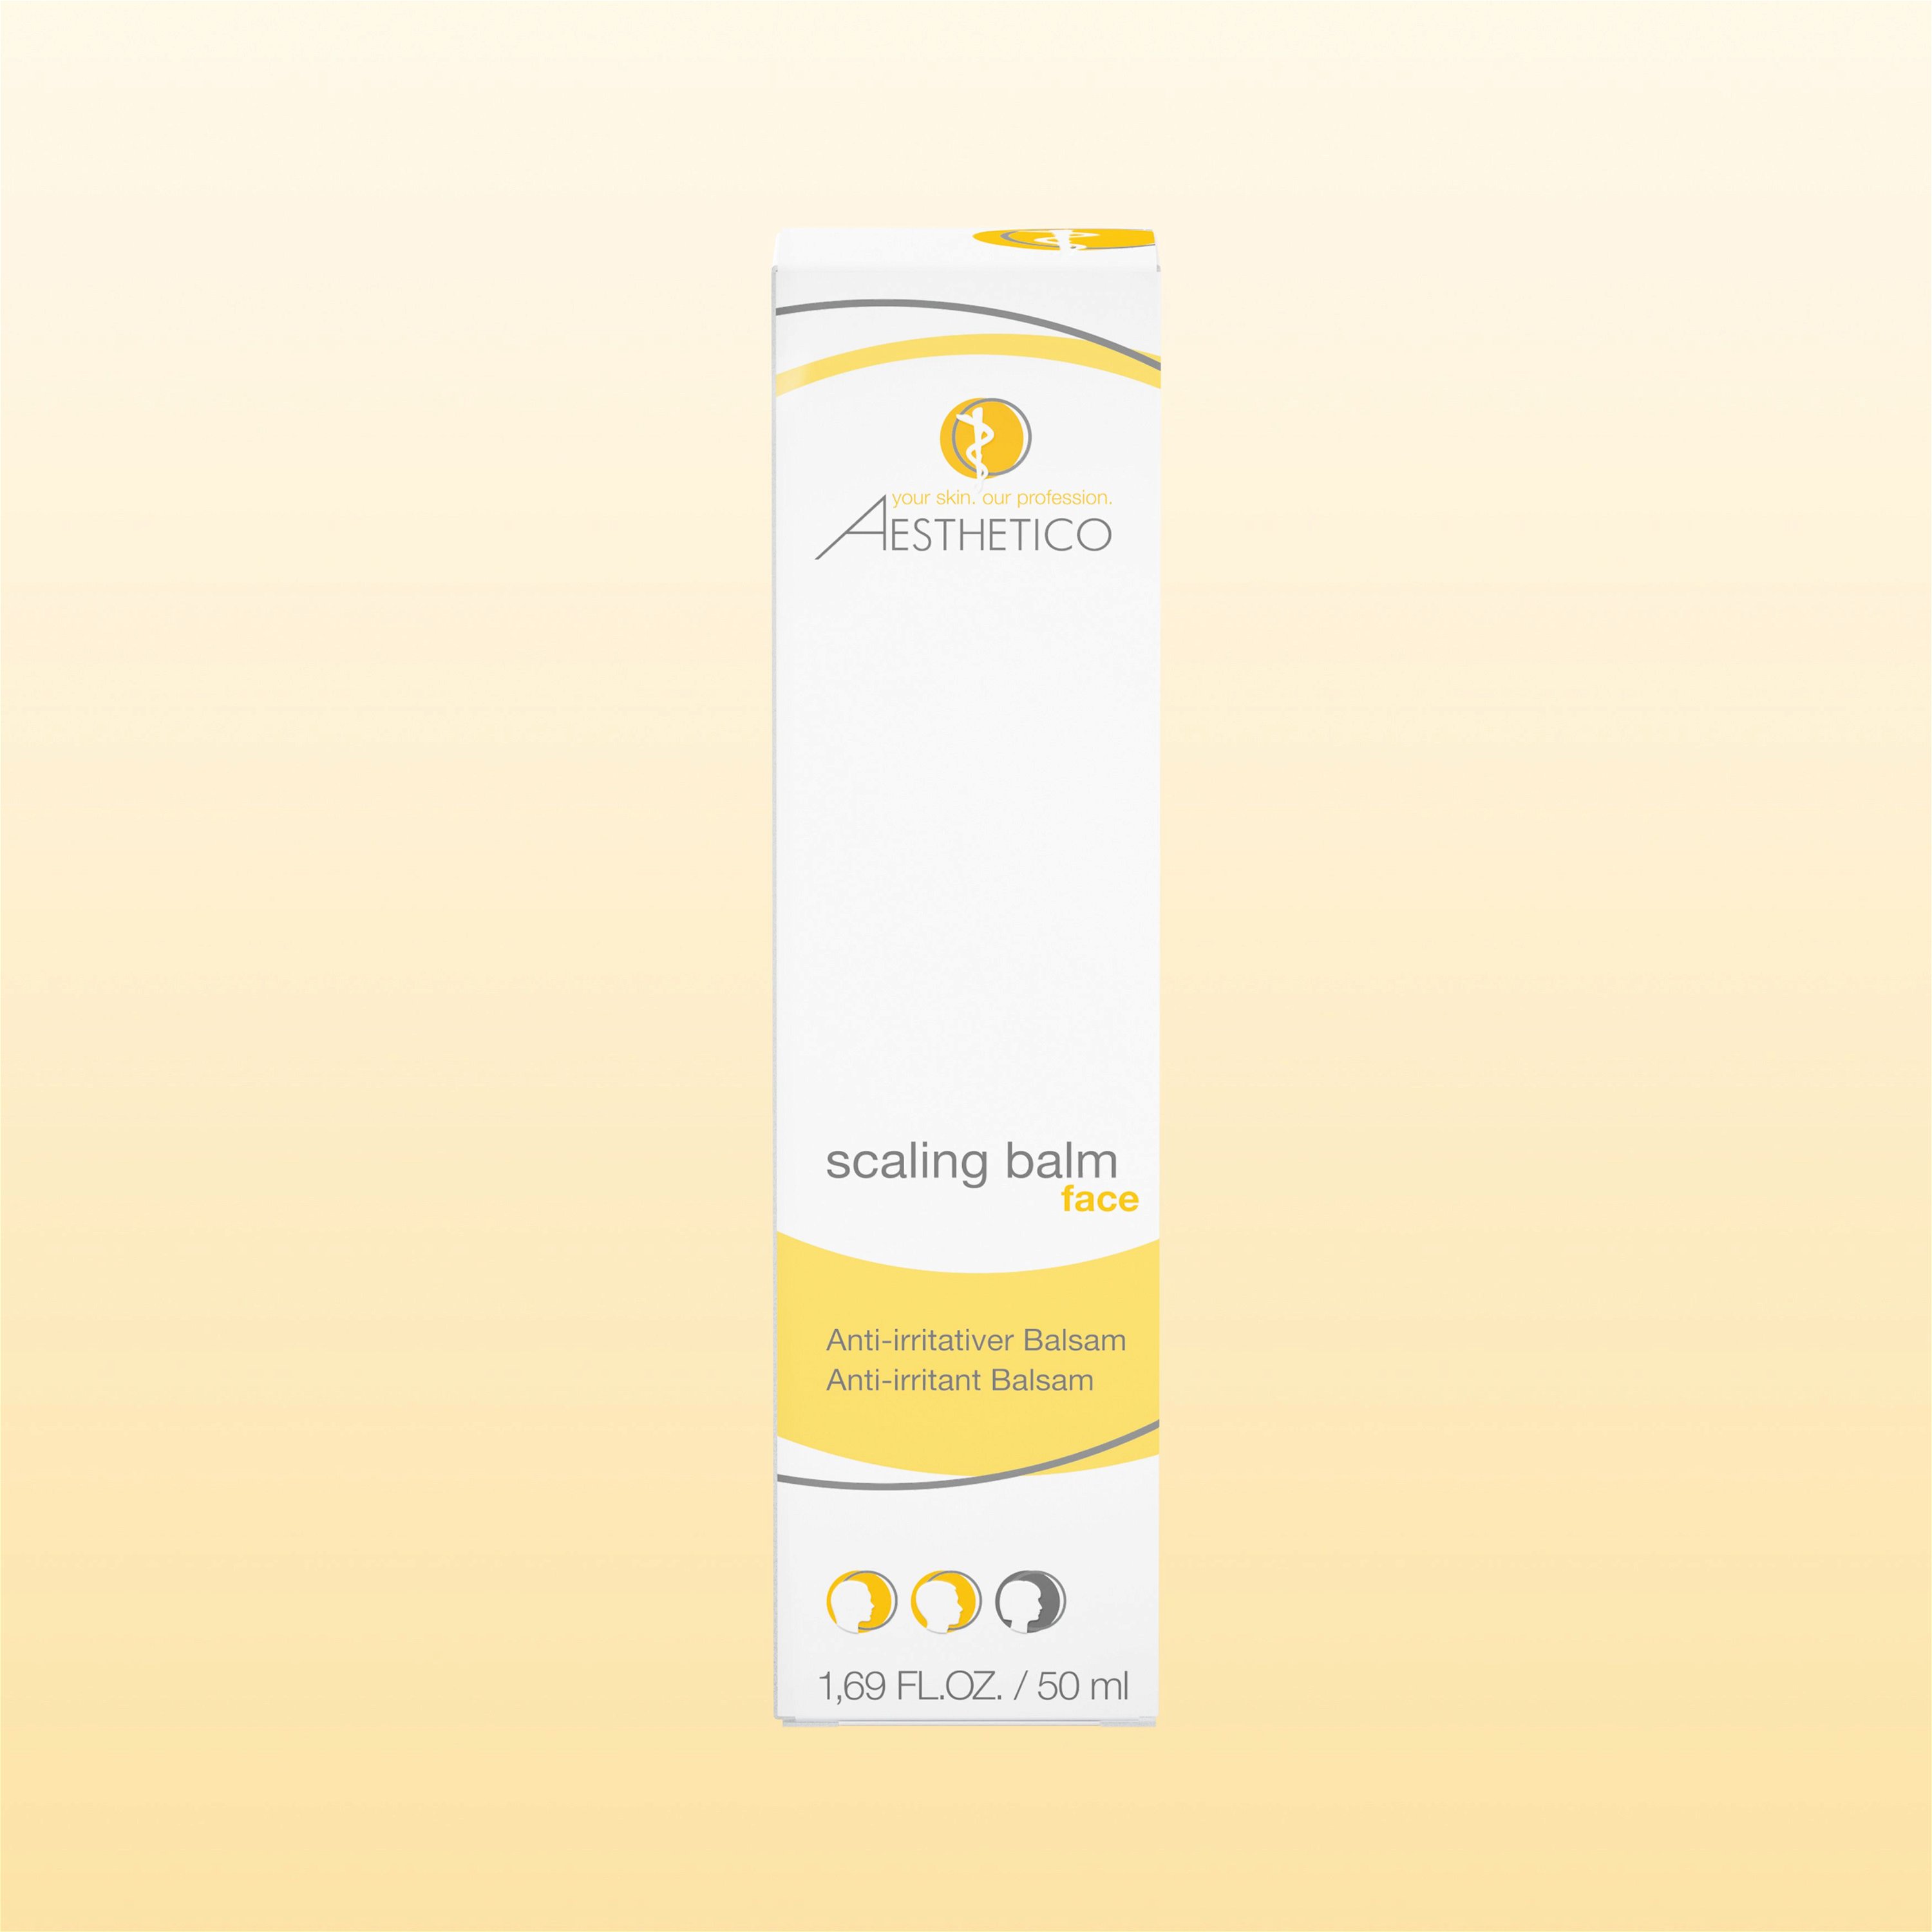 Umverpackung AESTHETICO scaling balm, 50 ml